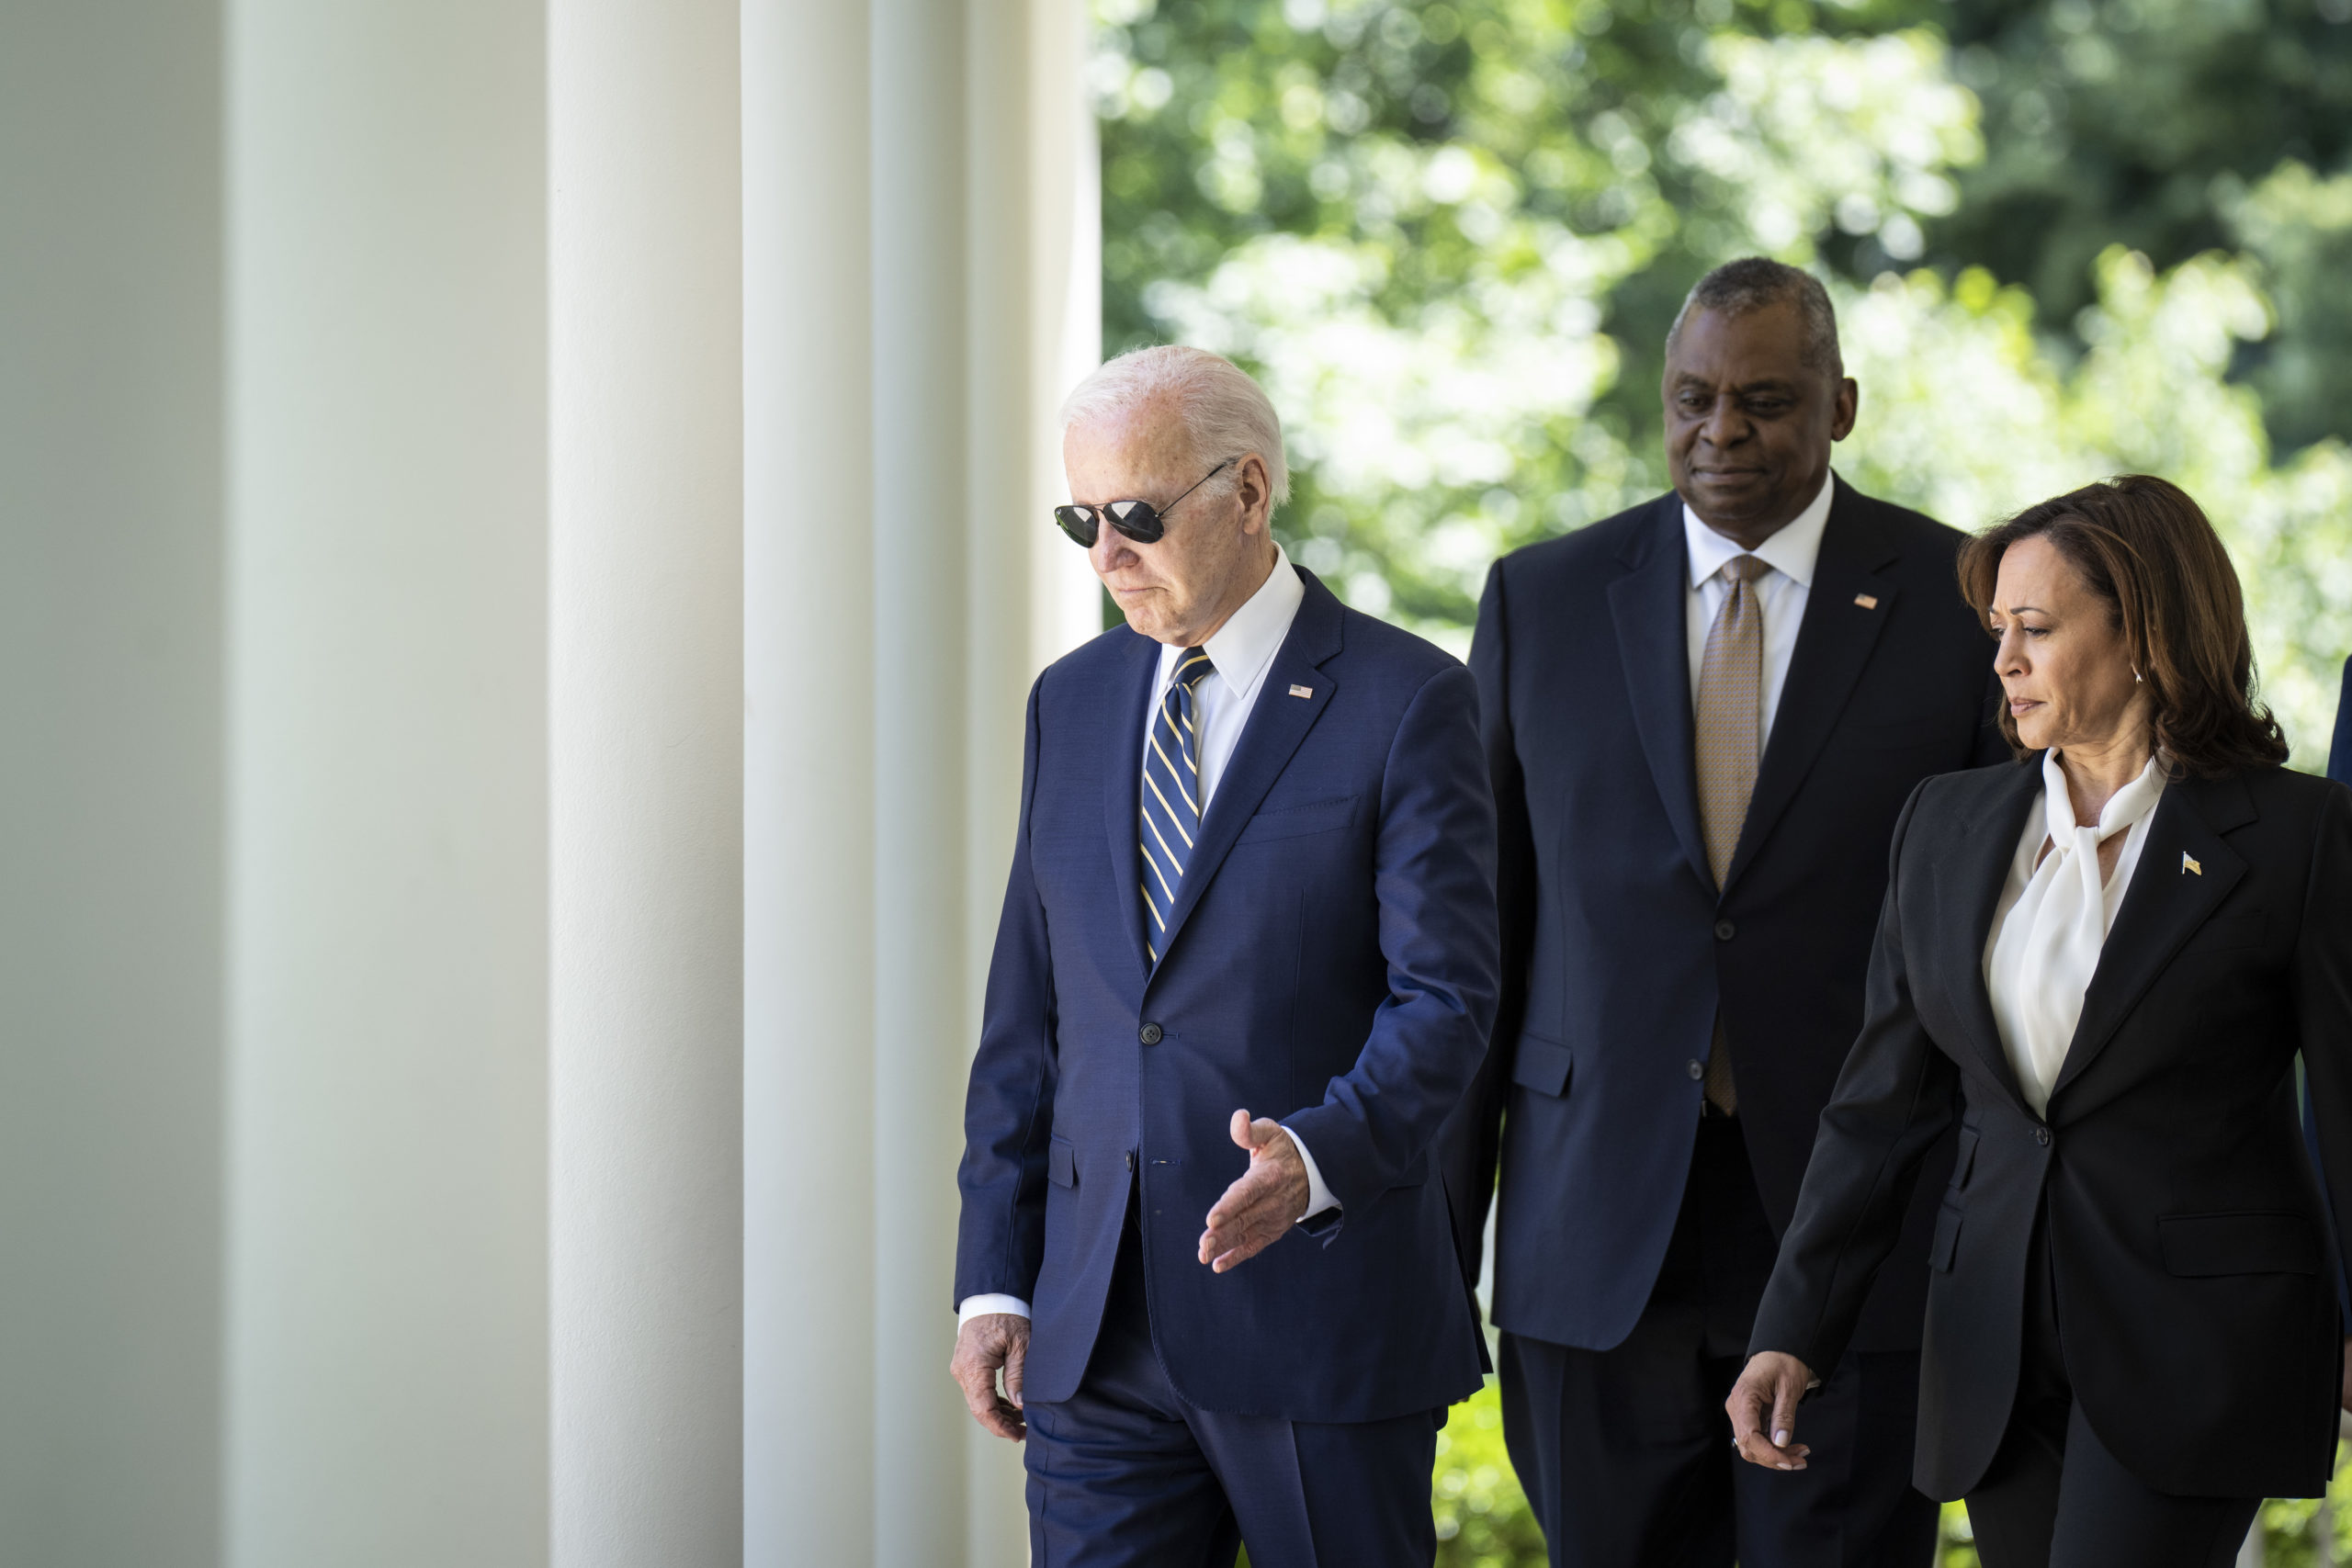 U.S. President Joe Biden, Secretary of Defense Lloyd Austin and Vice President Kamala Harris arrive for an event to announce the President's intent to nominate Gen. Charles Q. Brown, Jr. to serve as the next Chairman of the Joint Chiefs of Staff in the Rose Garden of the White House May 25, 2023 in Washington, DC. Brown is currently the U.S. Air Force chief of staff. If confirmed by the Senate, Brown would be second African-American man, after Colin Powell, to hold the position of Joint Chiefs of Staff, the senior military adviser to the president. (Photo by Drew Angerer/Getty Images)